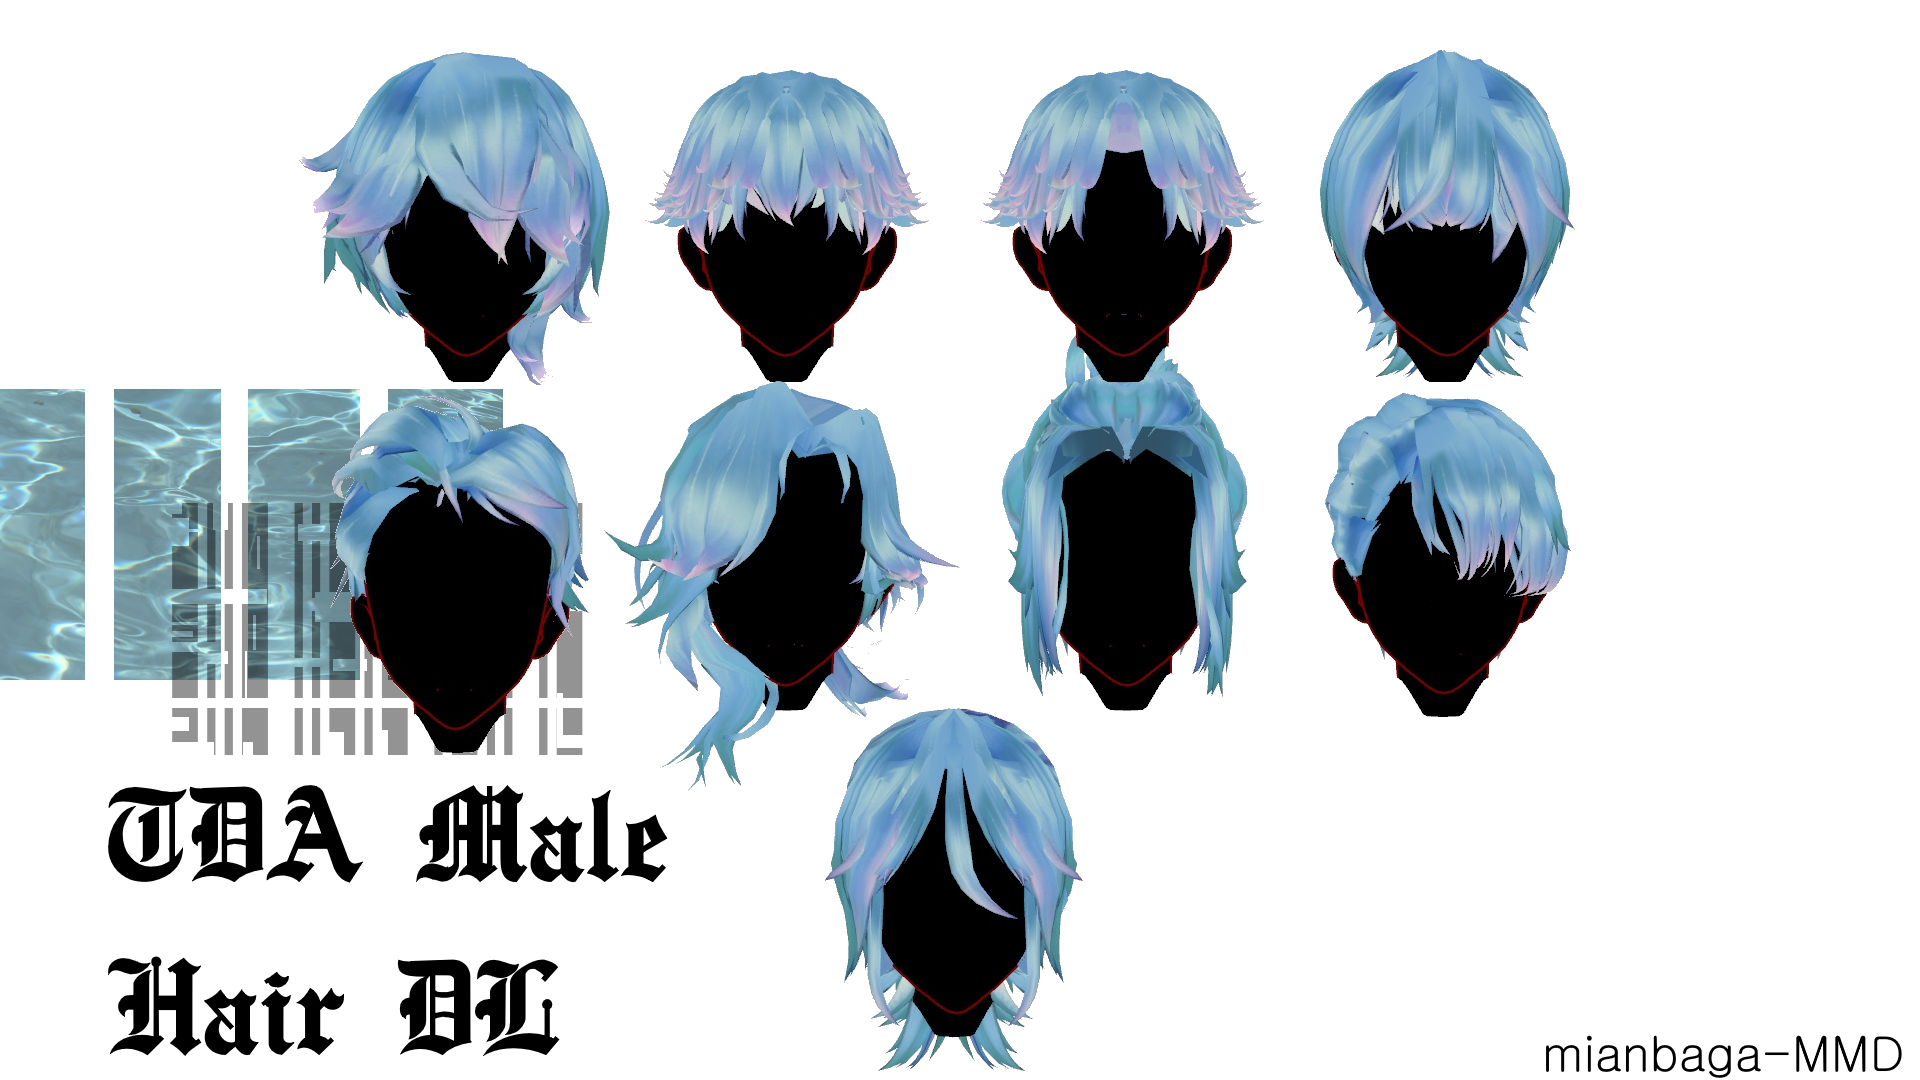 MMD Model with Blue Hair - wide 7